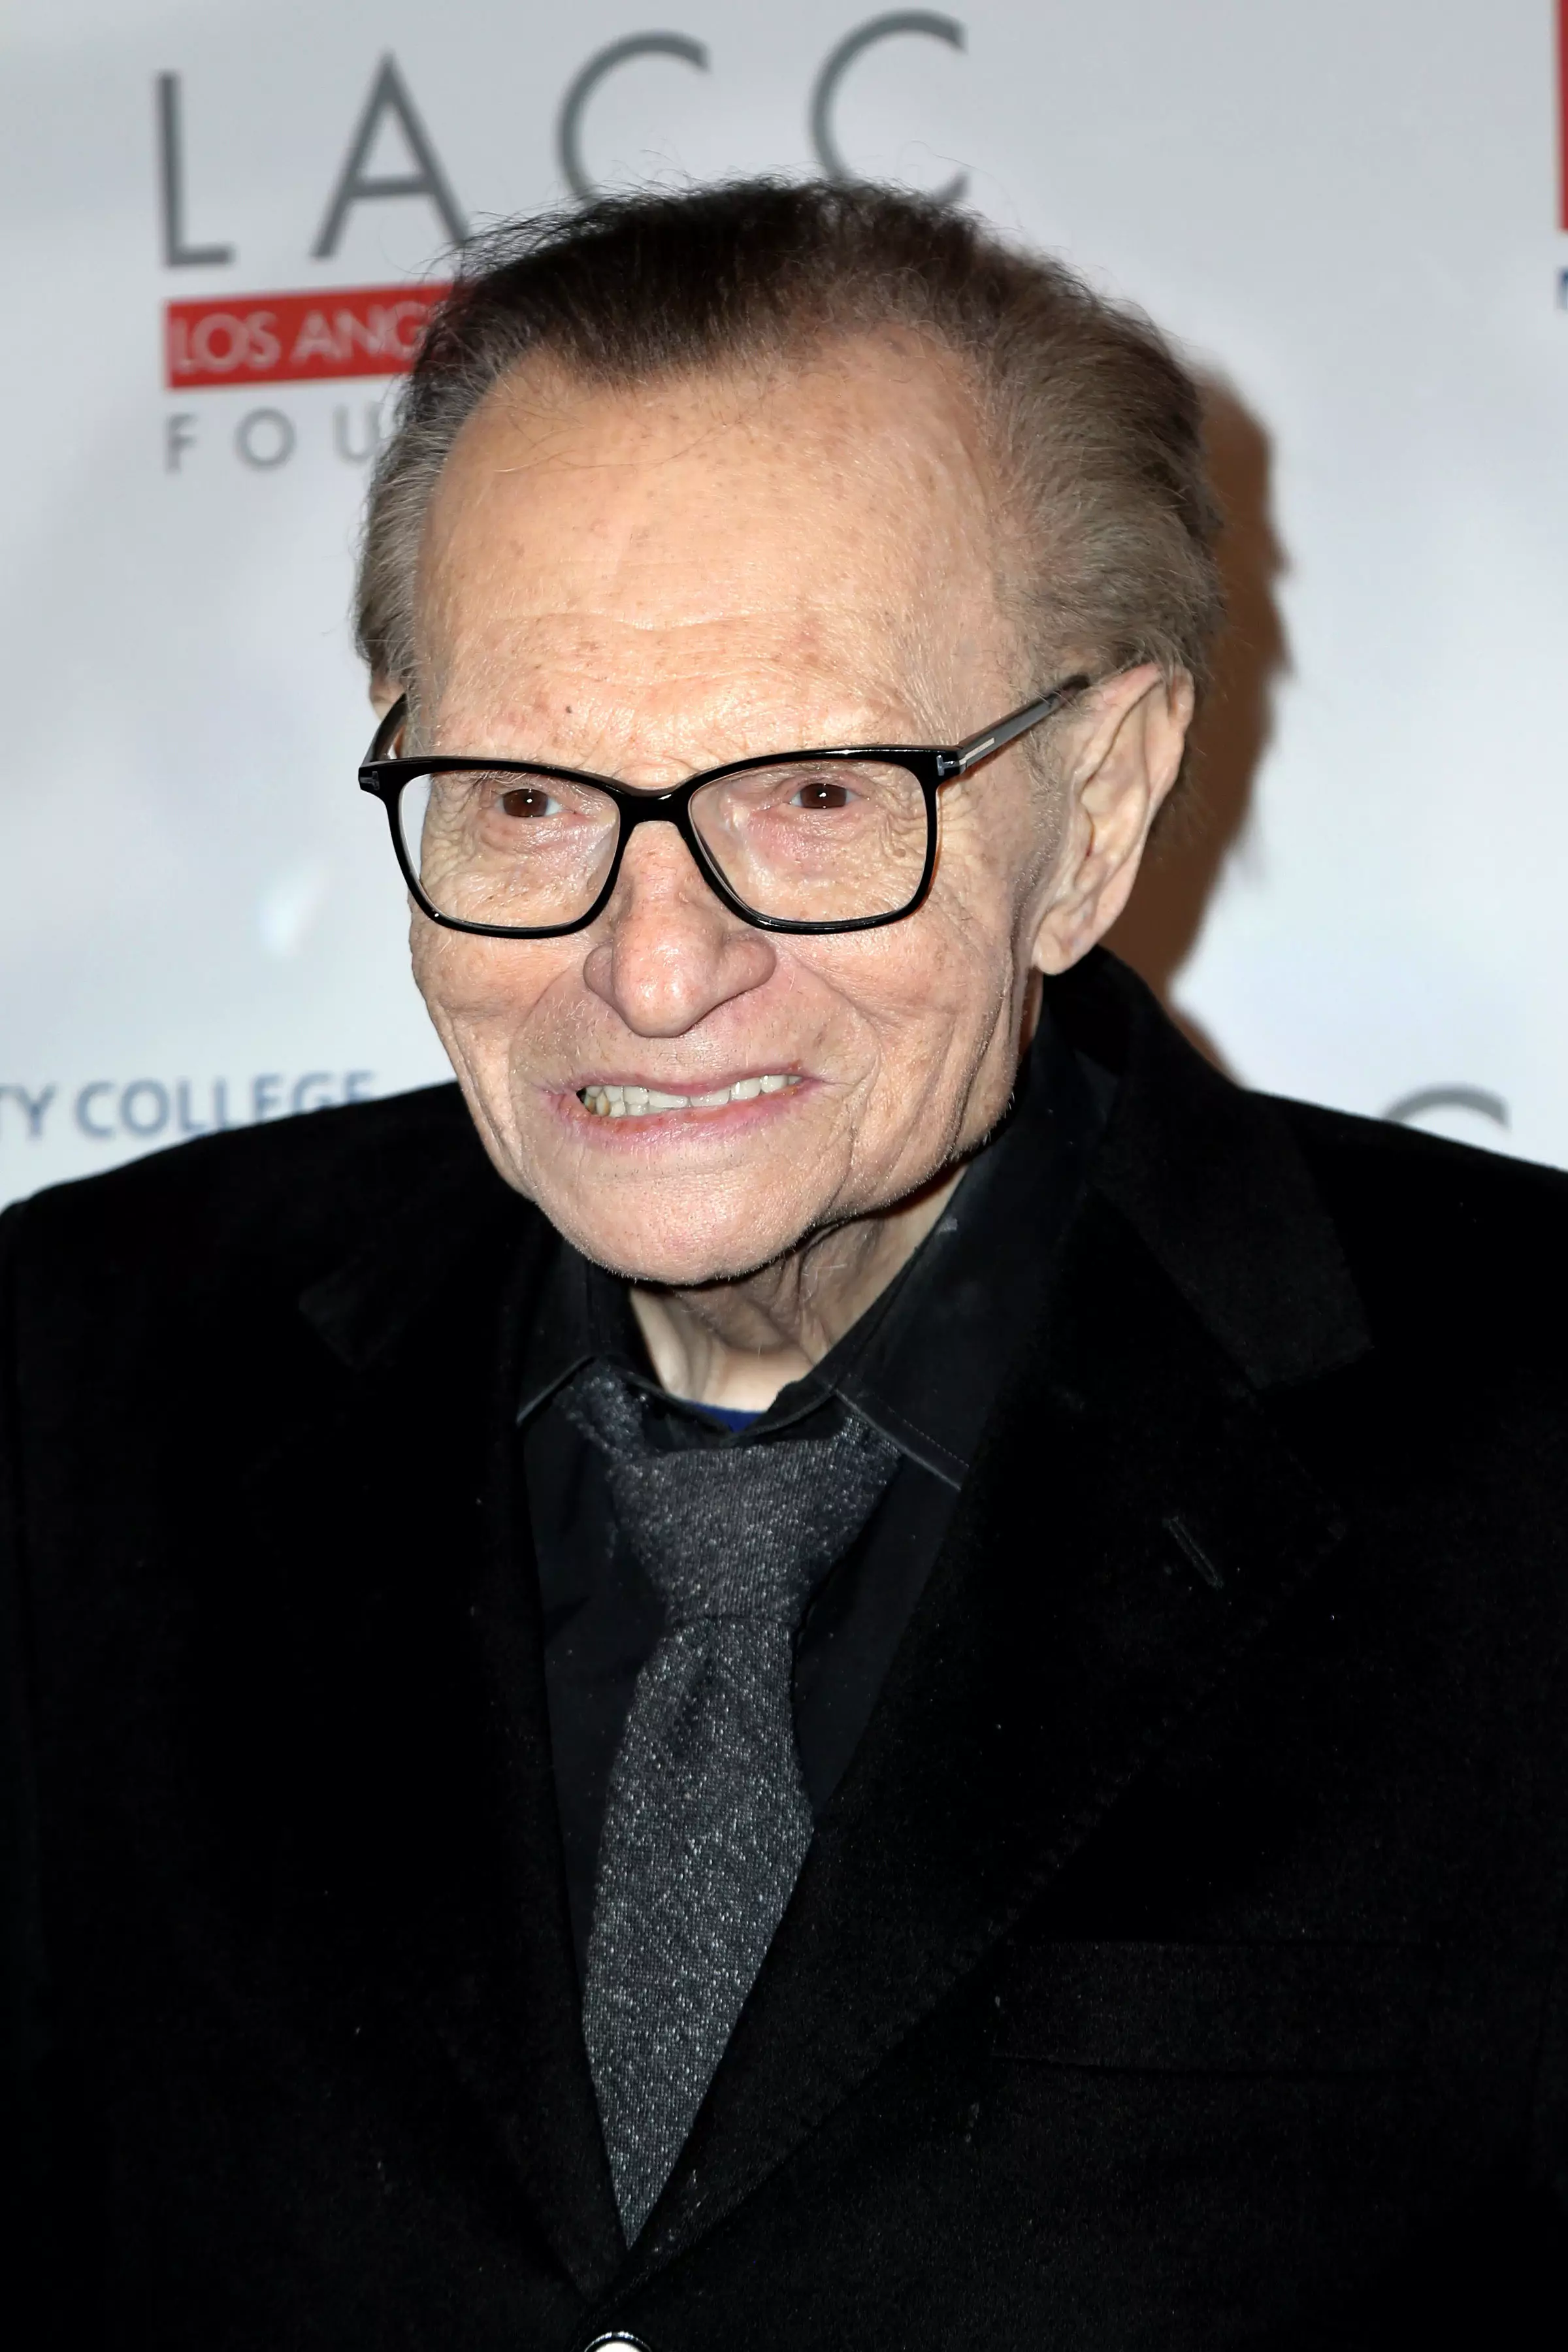 Larry King passed away at the age of 87 today (23 January).